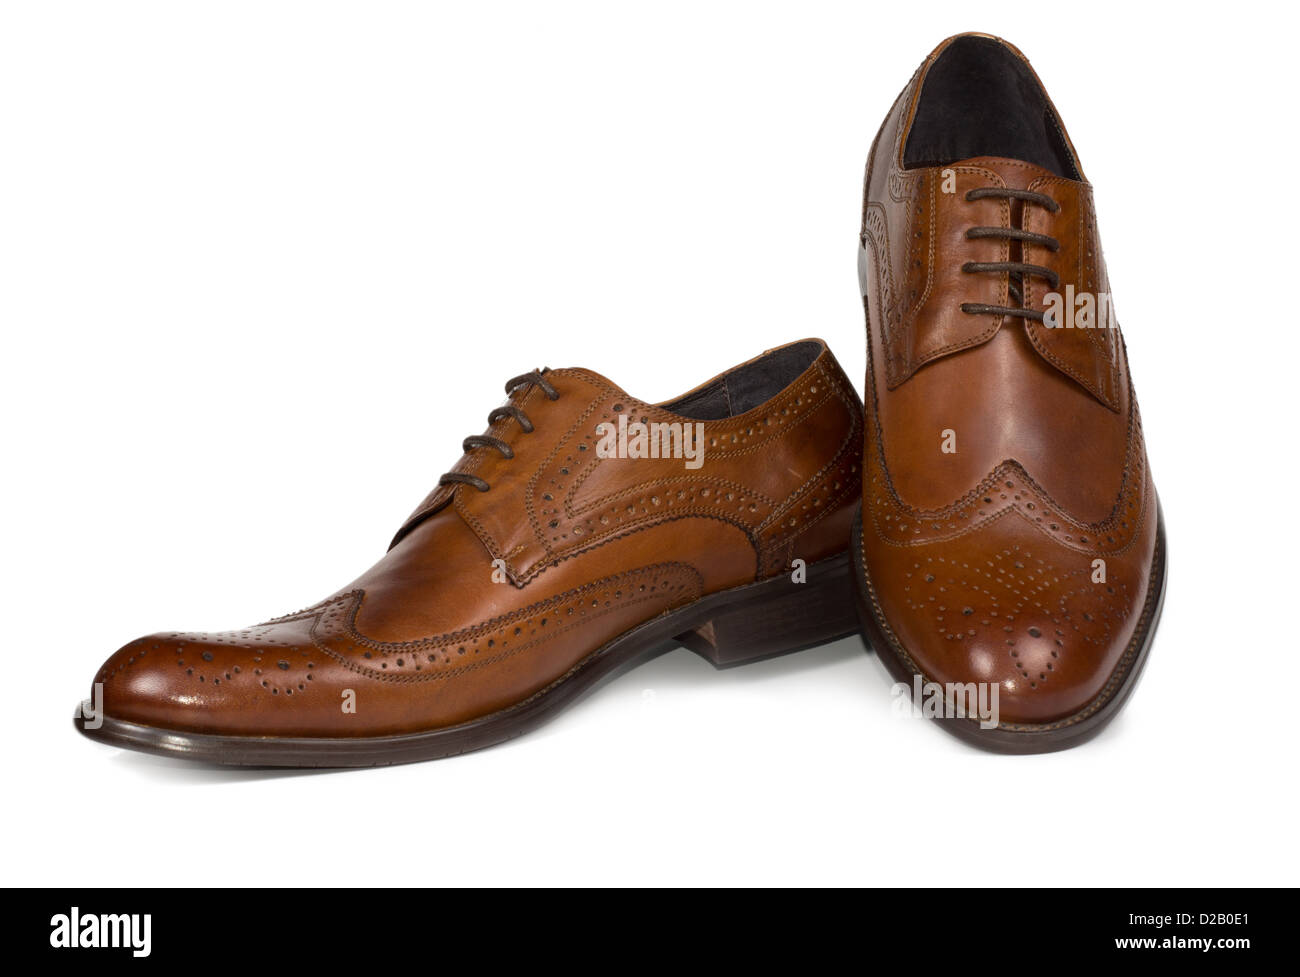 Pair of stylish brown leather mens lace up shoes with elegant seam patterning for formal wear on white Stock Photo